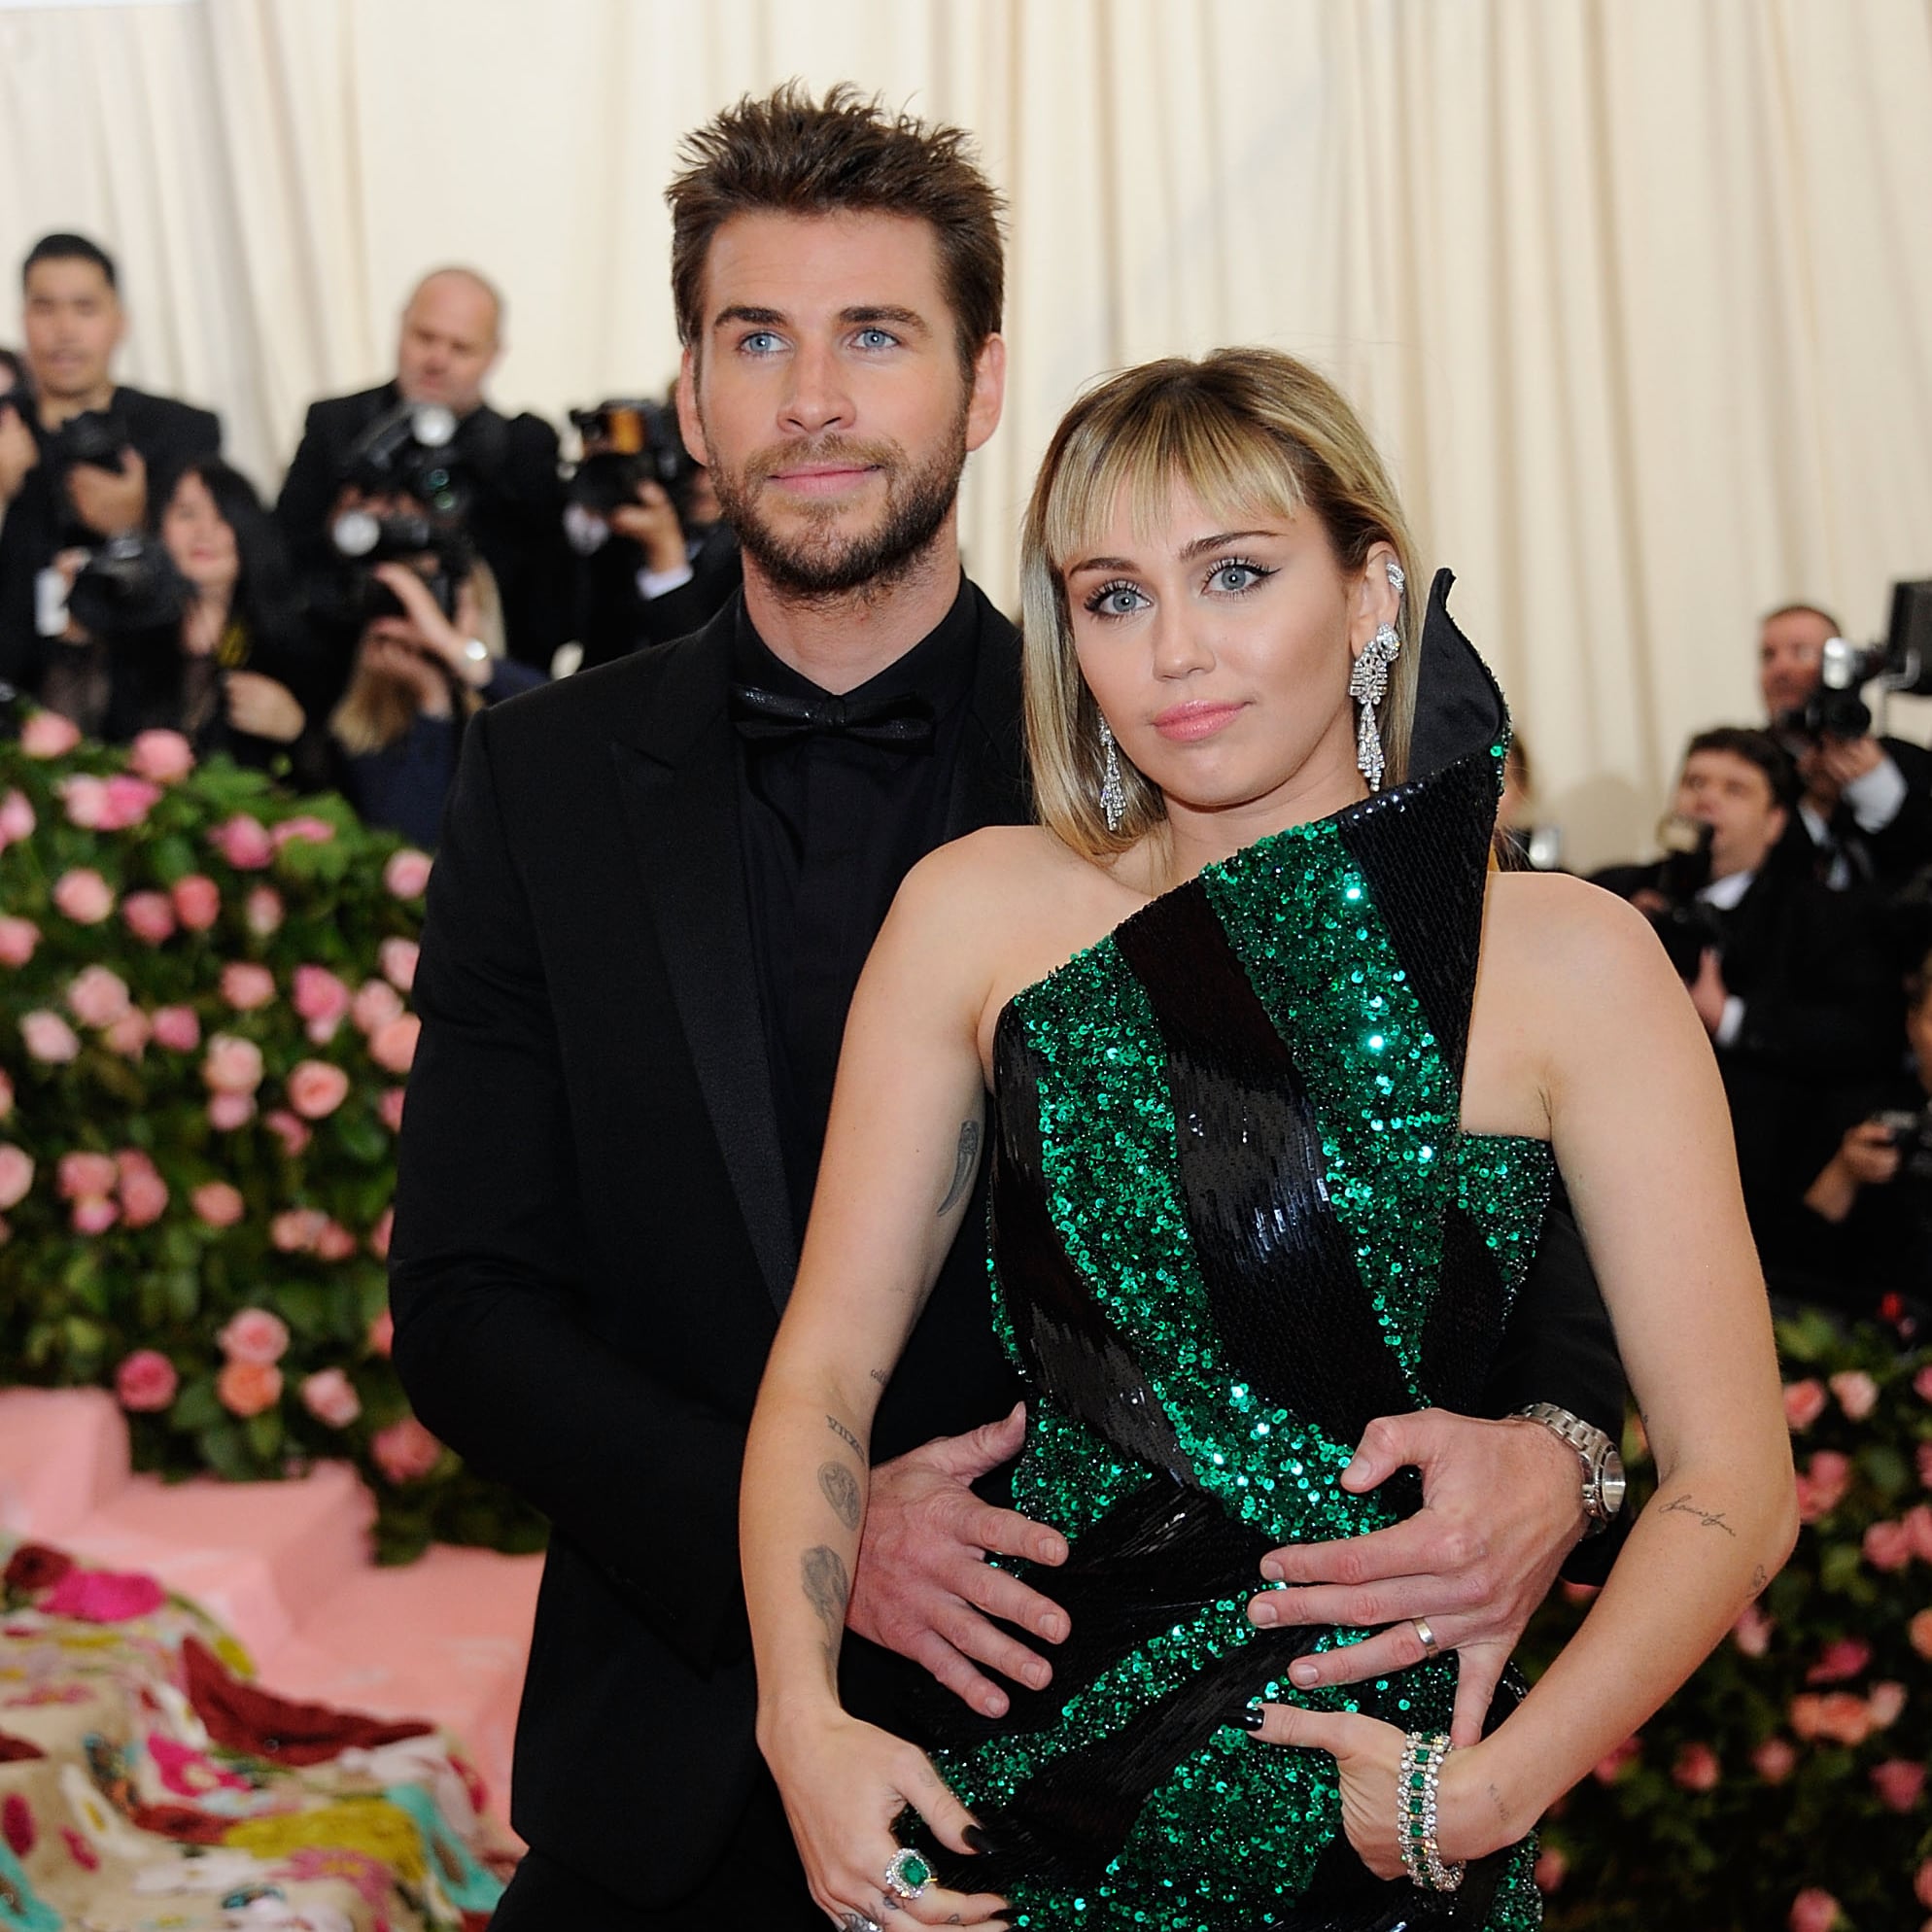 Together miley and liam Are Miley